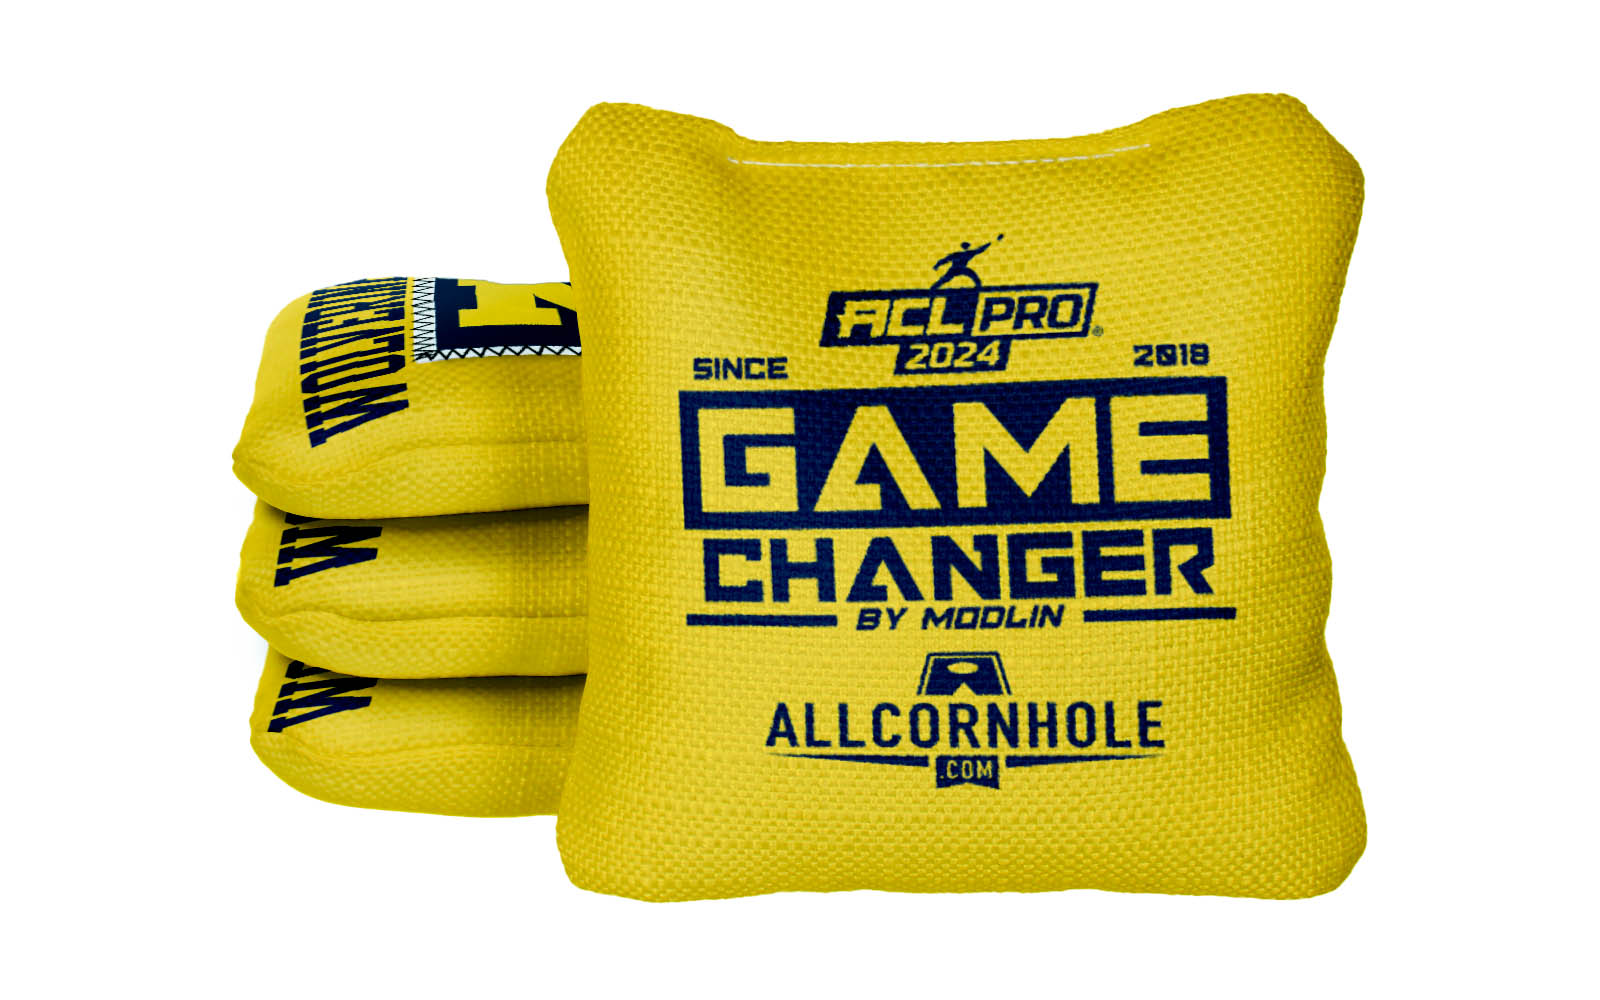 Officially Licensed Collegiate Cornhole Bags - AllCornhole Game Changers - Set of 4 - University of Michigan